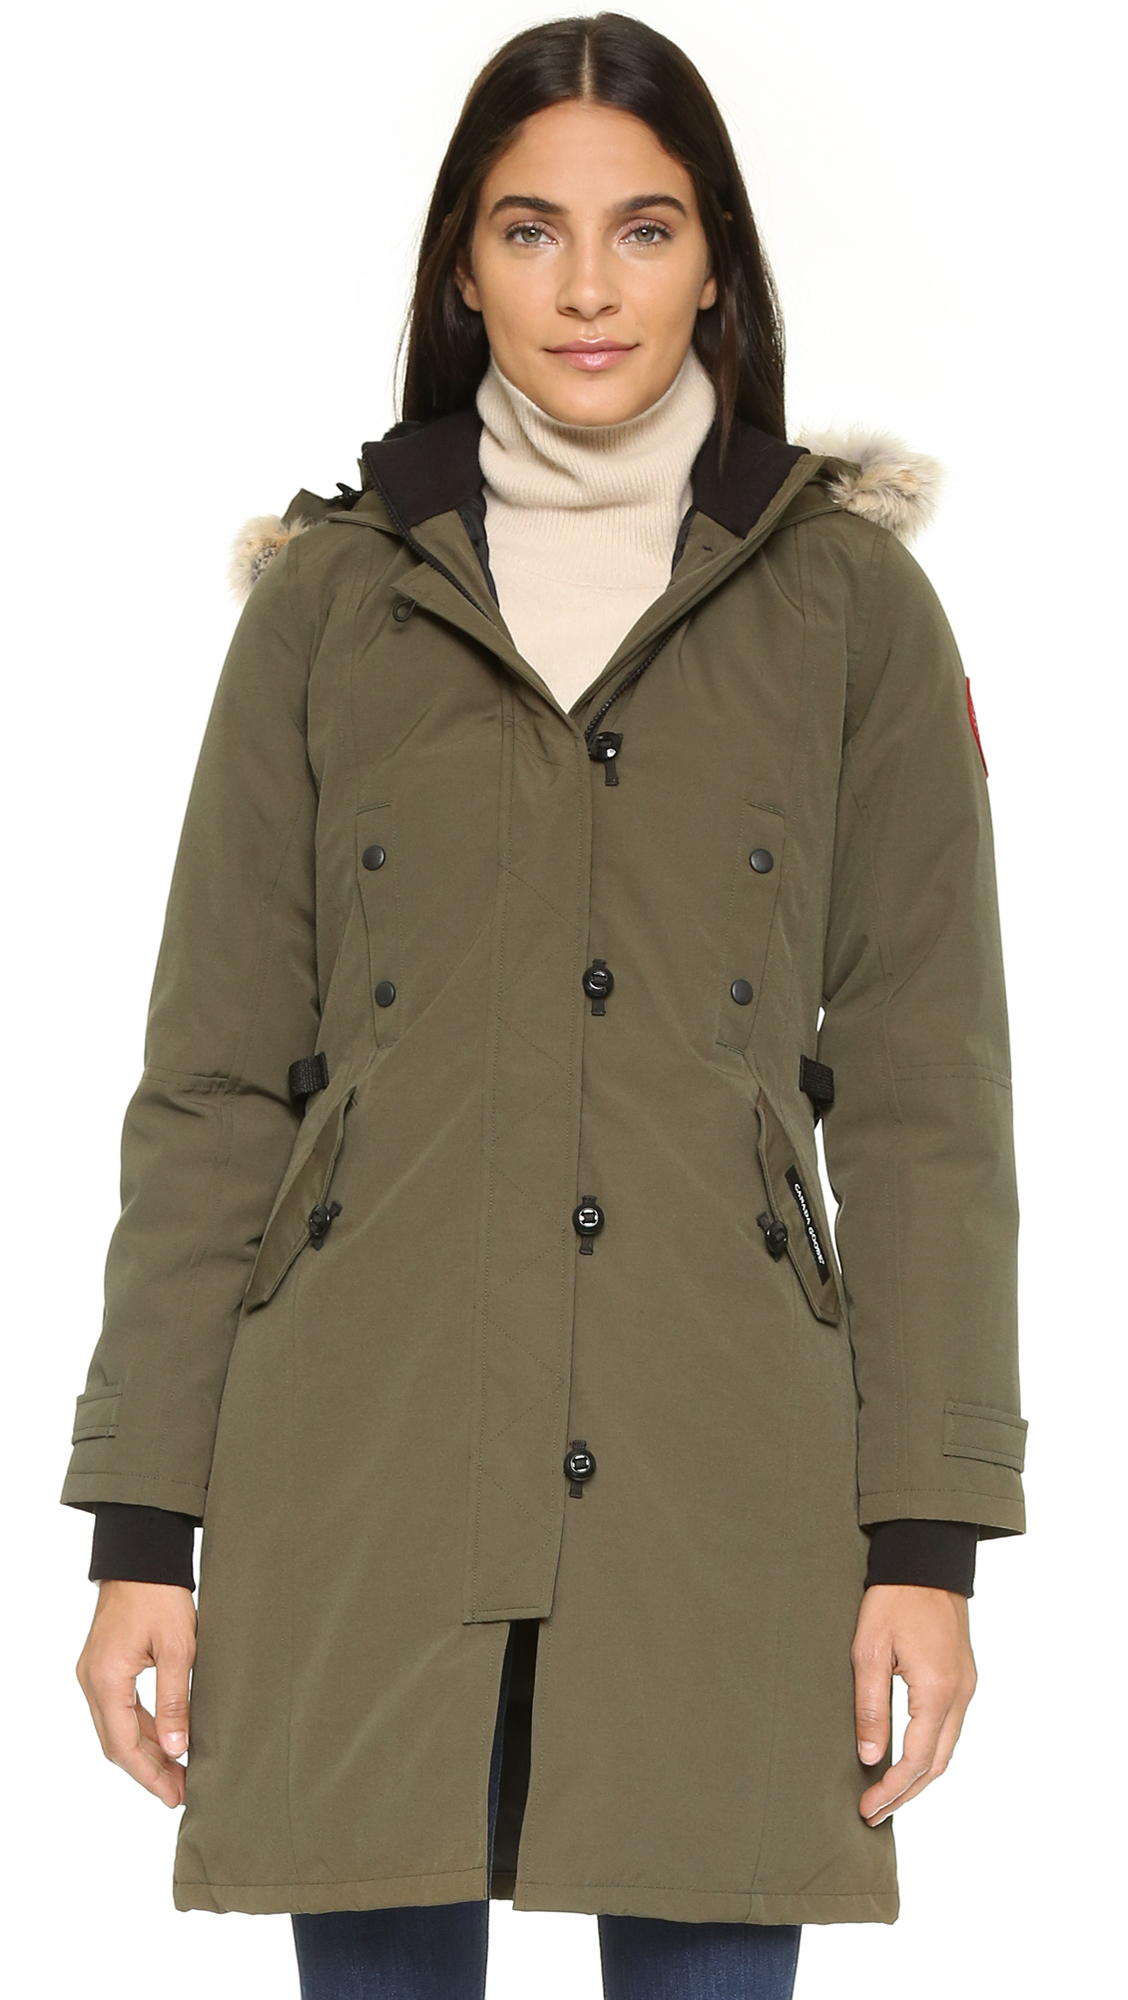 Canada Goose jackets online price - Canada goose Kensington Parka - Military Green in Green (Algonquin ...